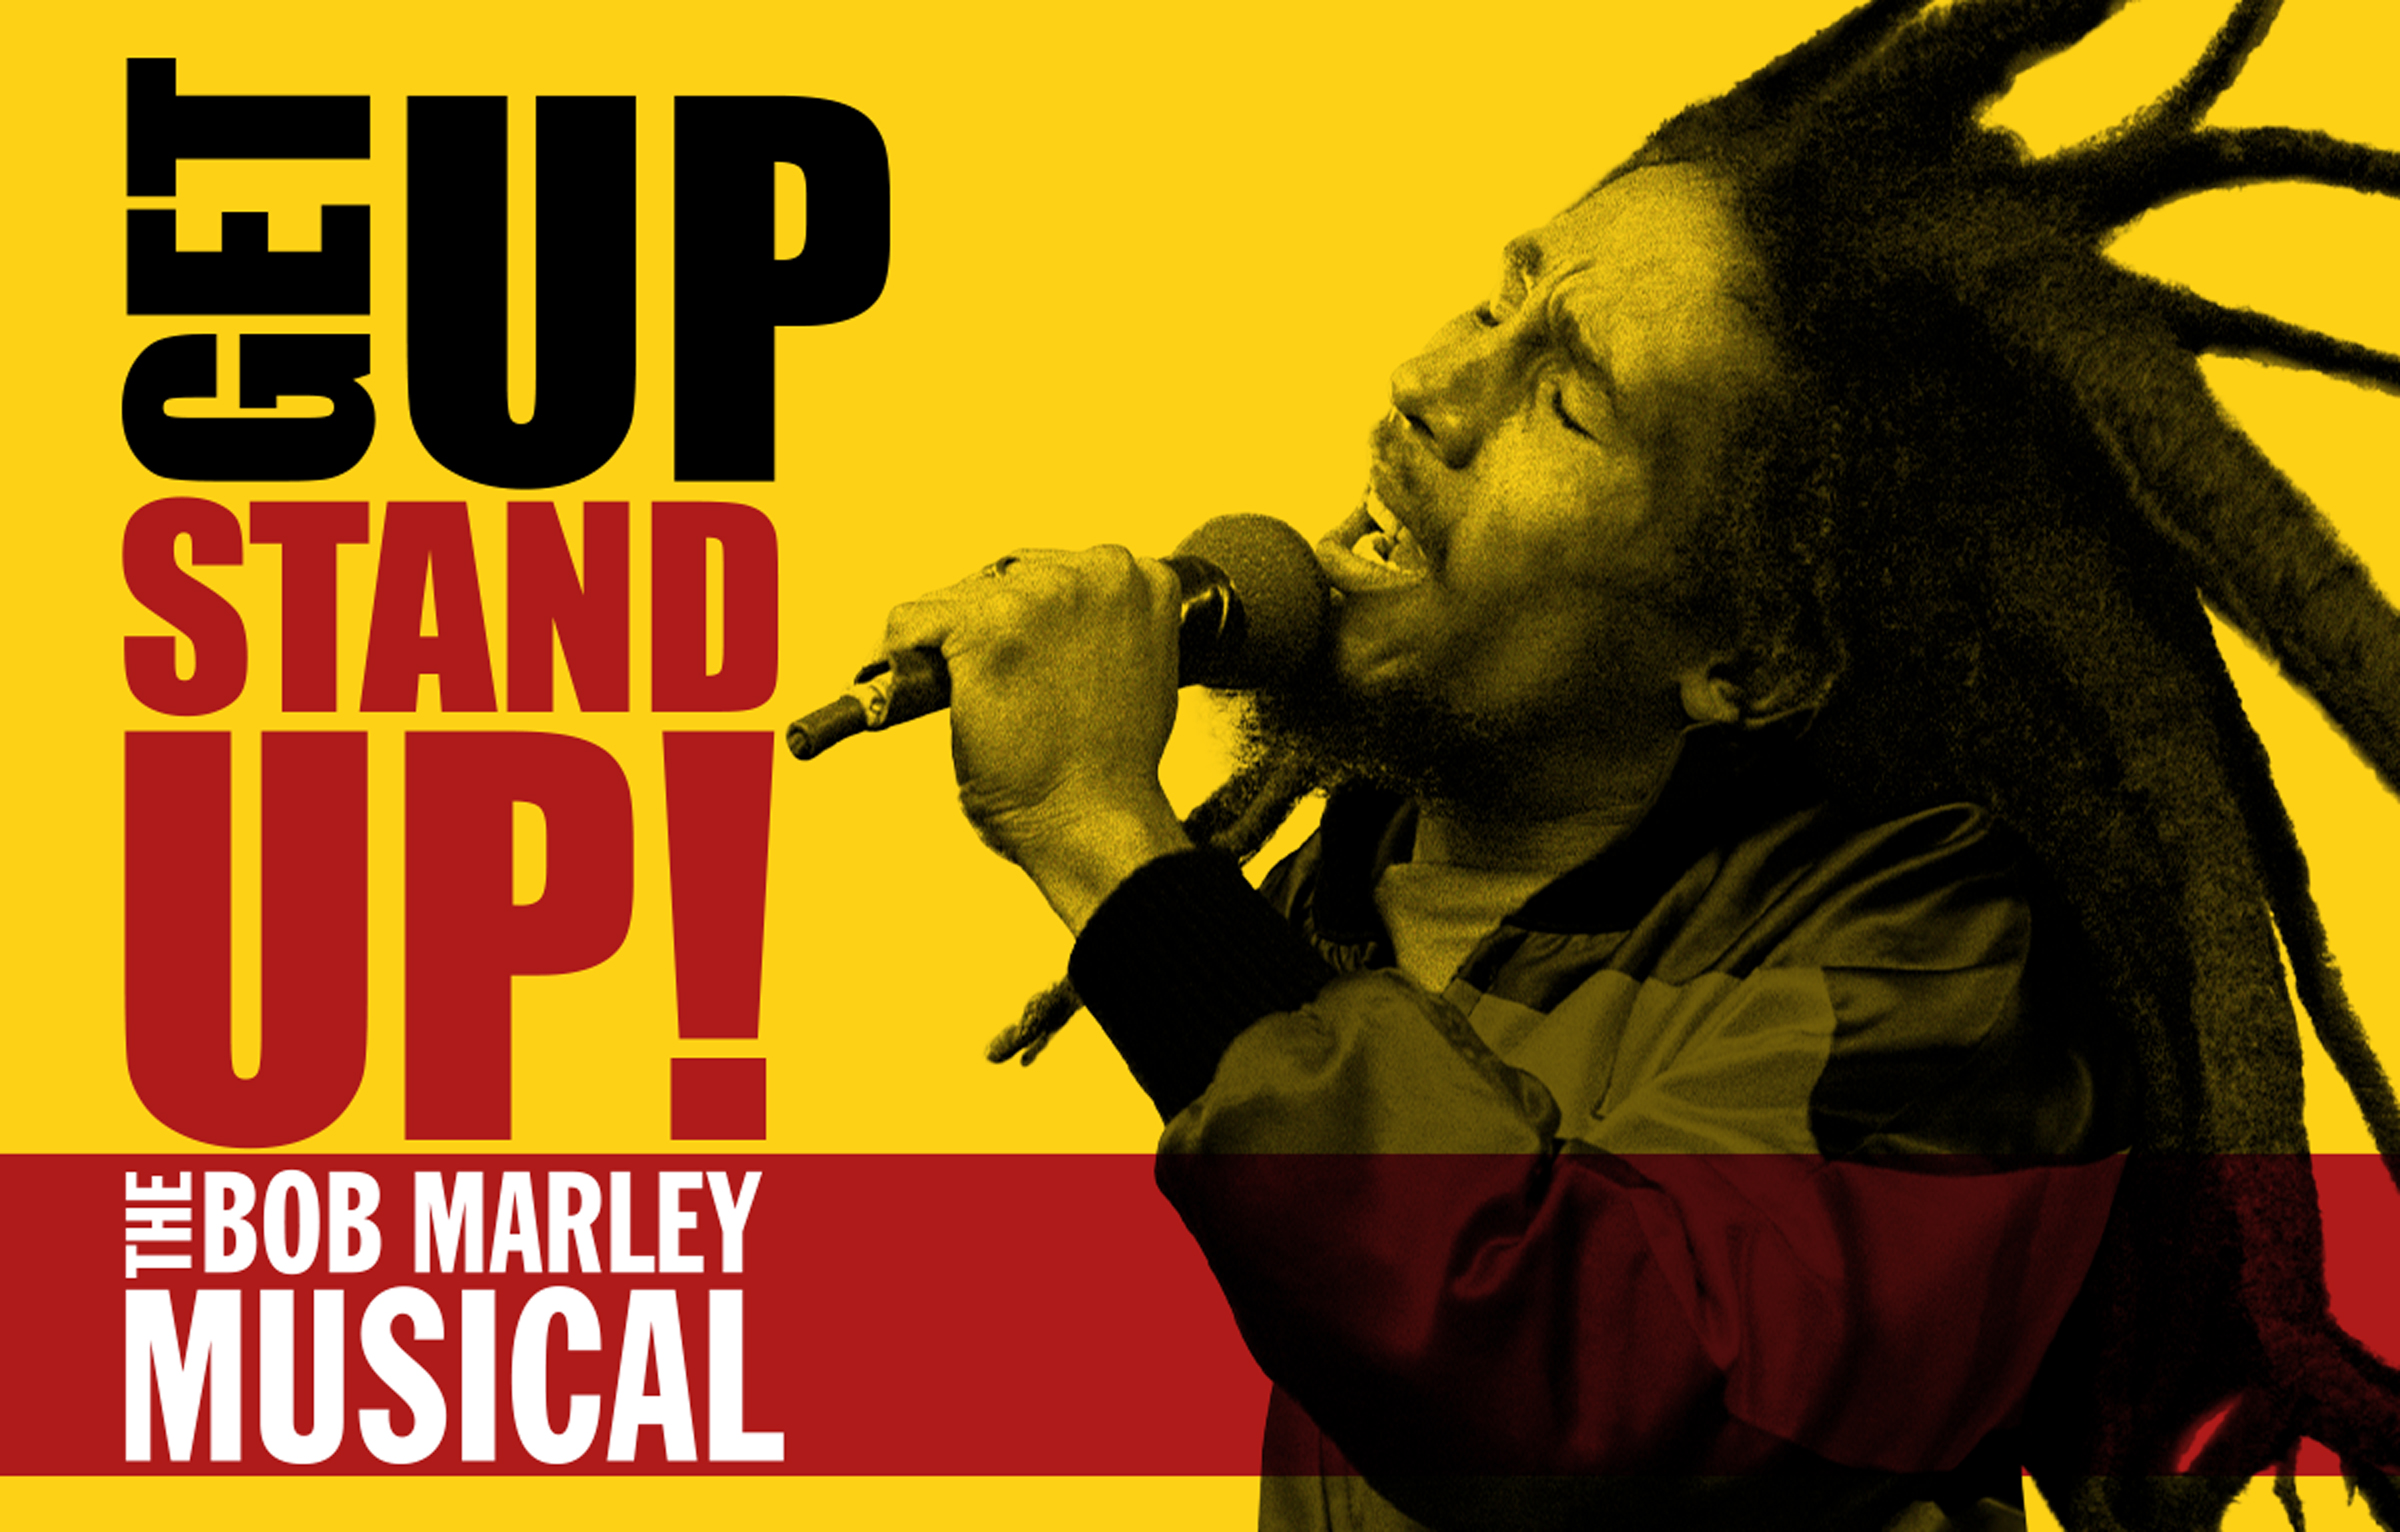 Get Up Stand Up! The Bob Marley Musical. Credit David Corio, Fifty-Six Hope Road Music Ltd